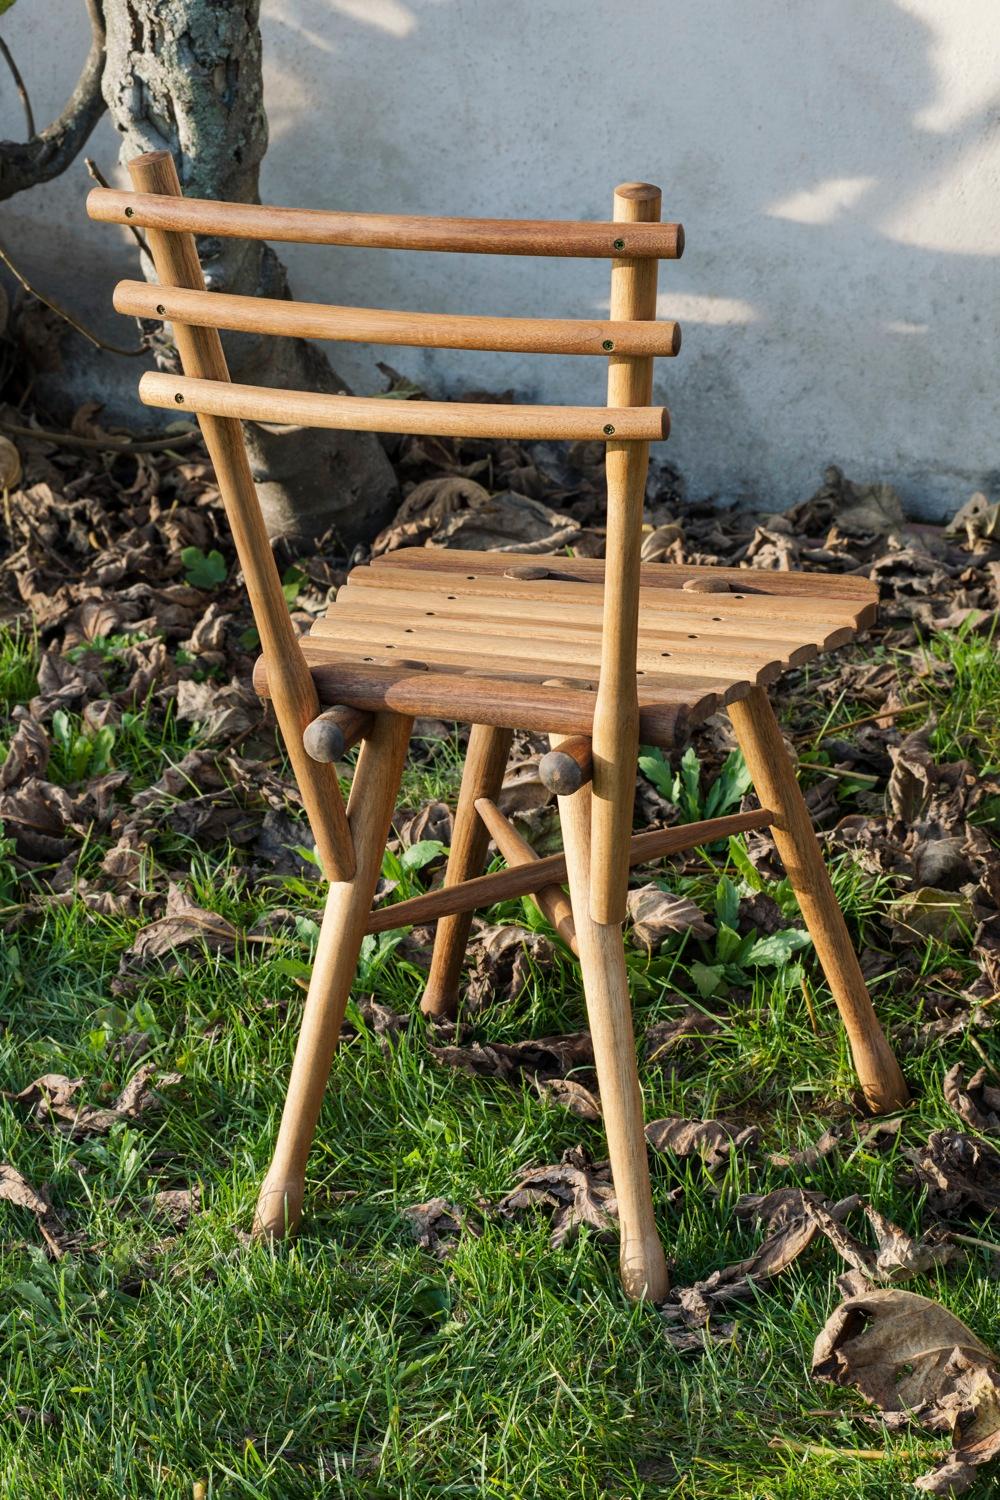 Naturally simple garden furniture. Gebrüder Thonet Vienna is proud to present the Garten range of furniture, including the rectangular table Gartentisch, the chair Gartentstuhl, and the backless bench Gartenbank. The items are all made with the